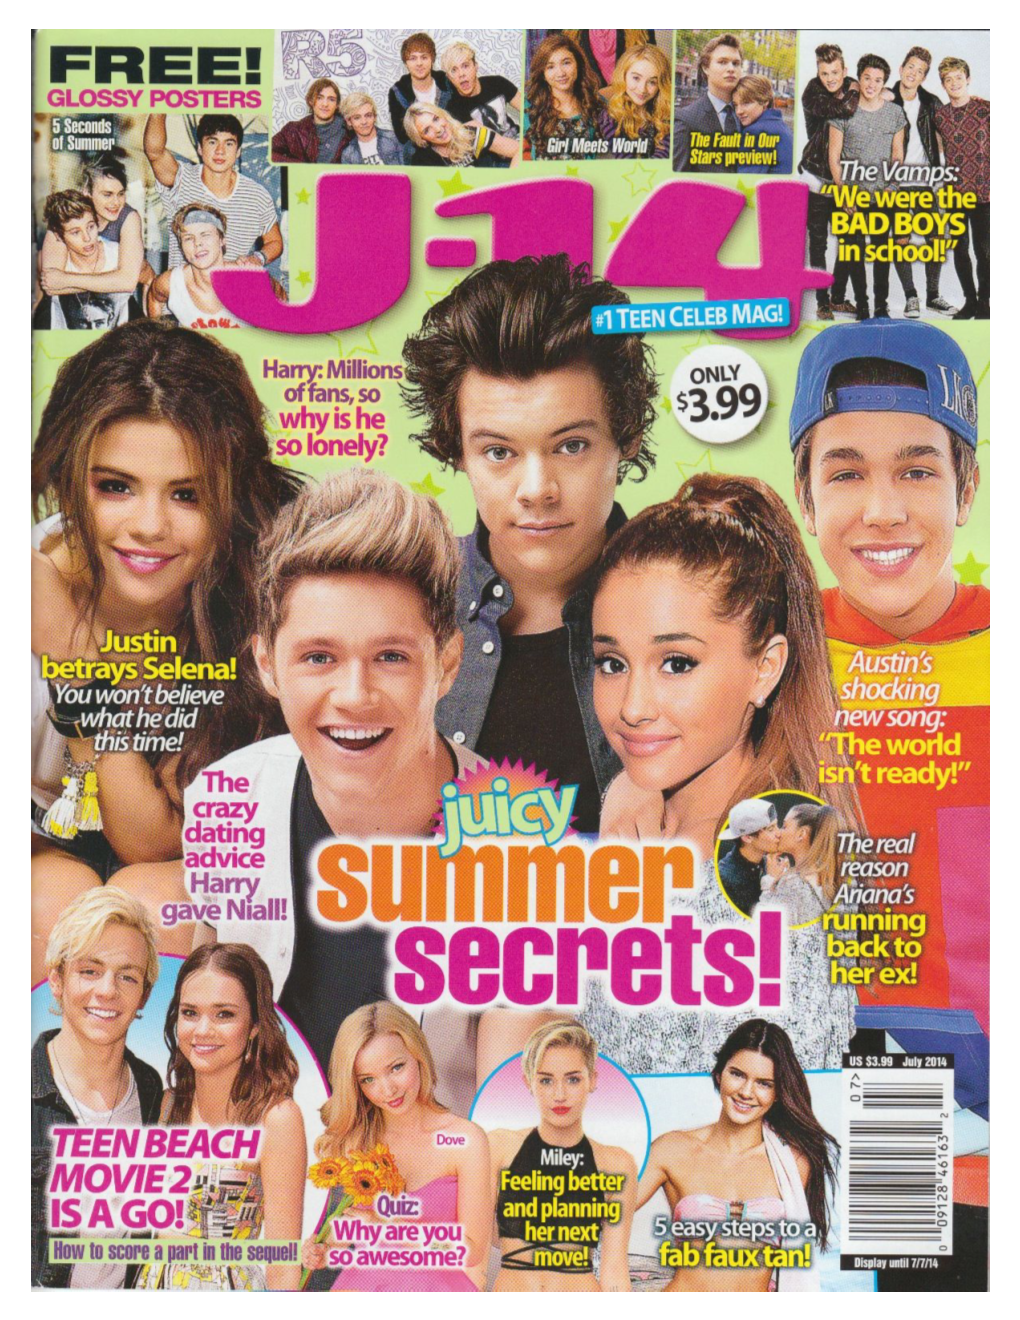 Dr. Rizk Featured on J-14 Magazine and Speaks About